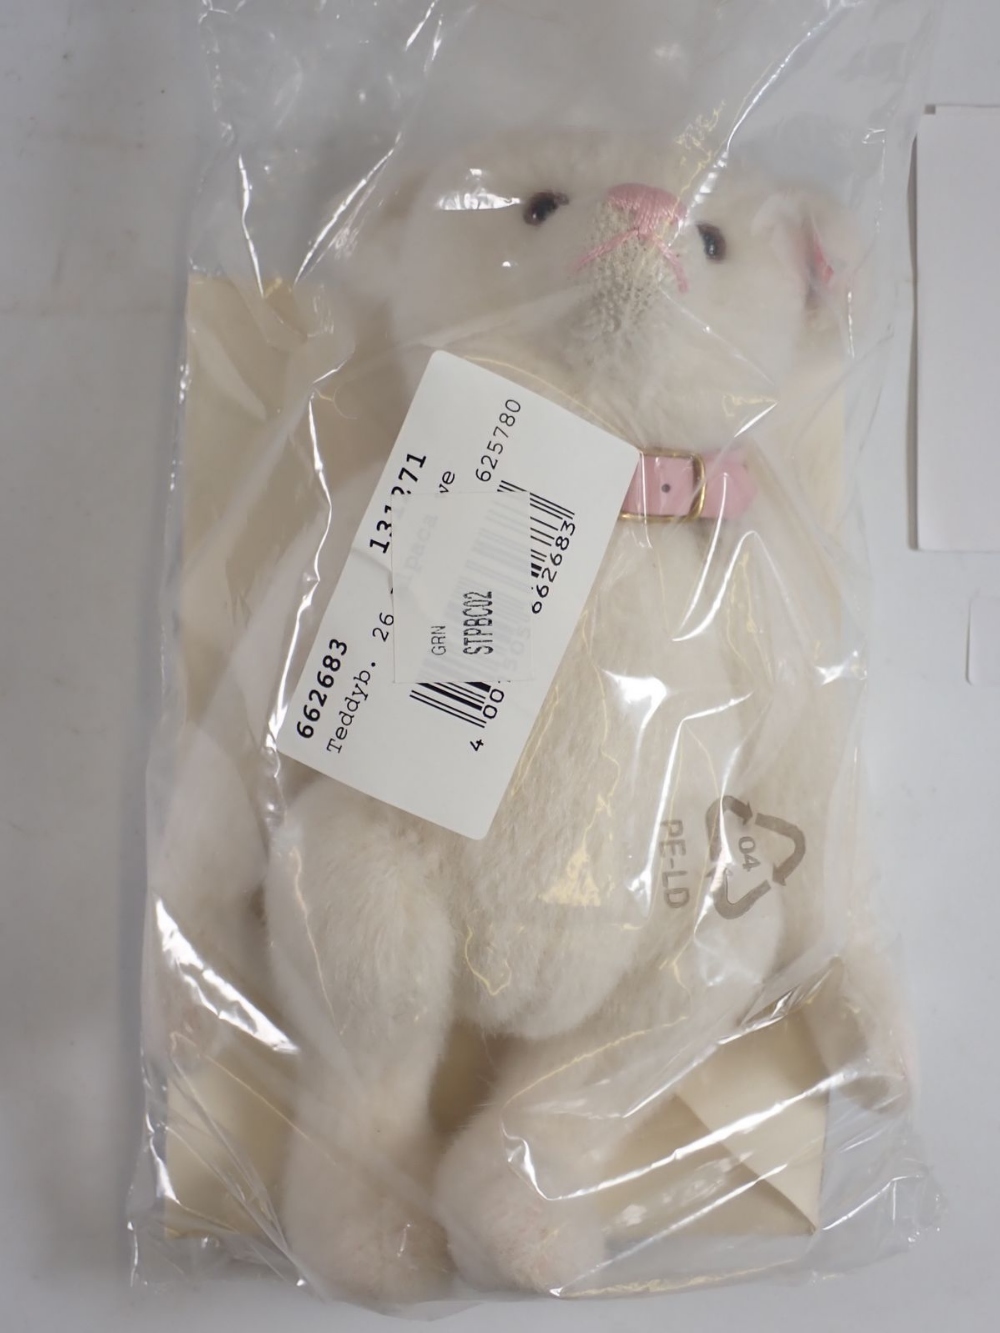 A Steiff limited edition white Alpaca bear Jill with box and certificate, sealed in bag - Bild 2 aus 2